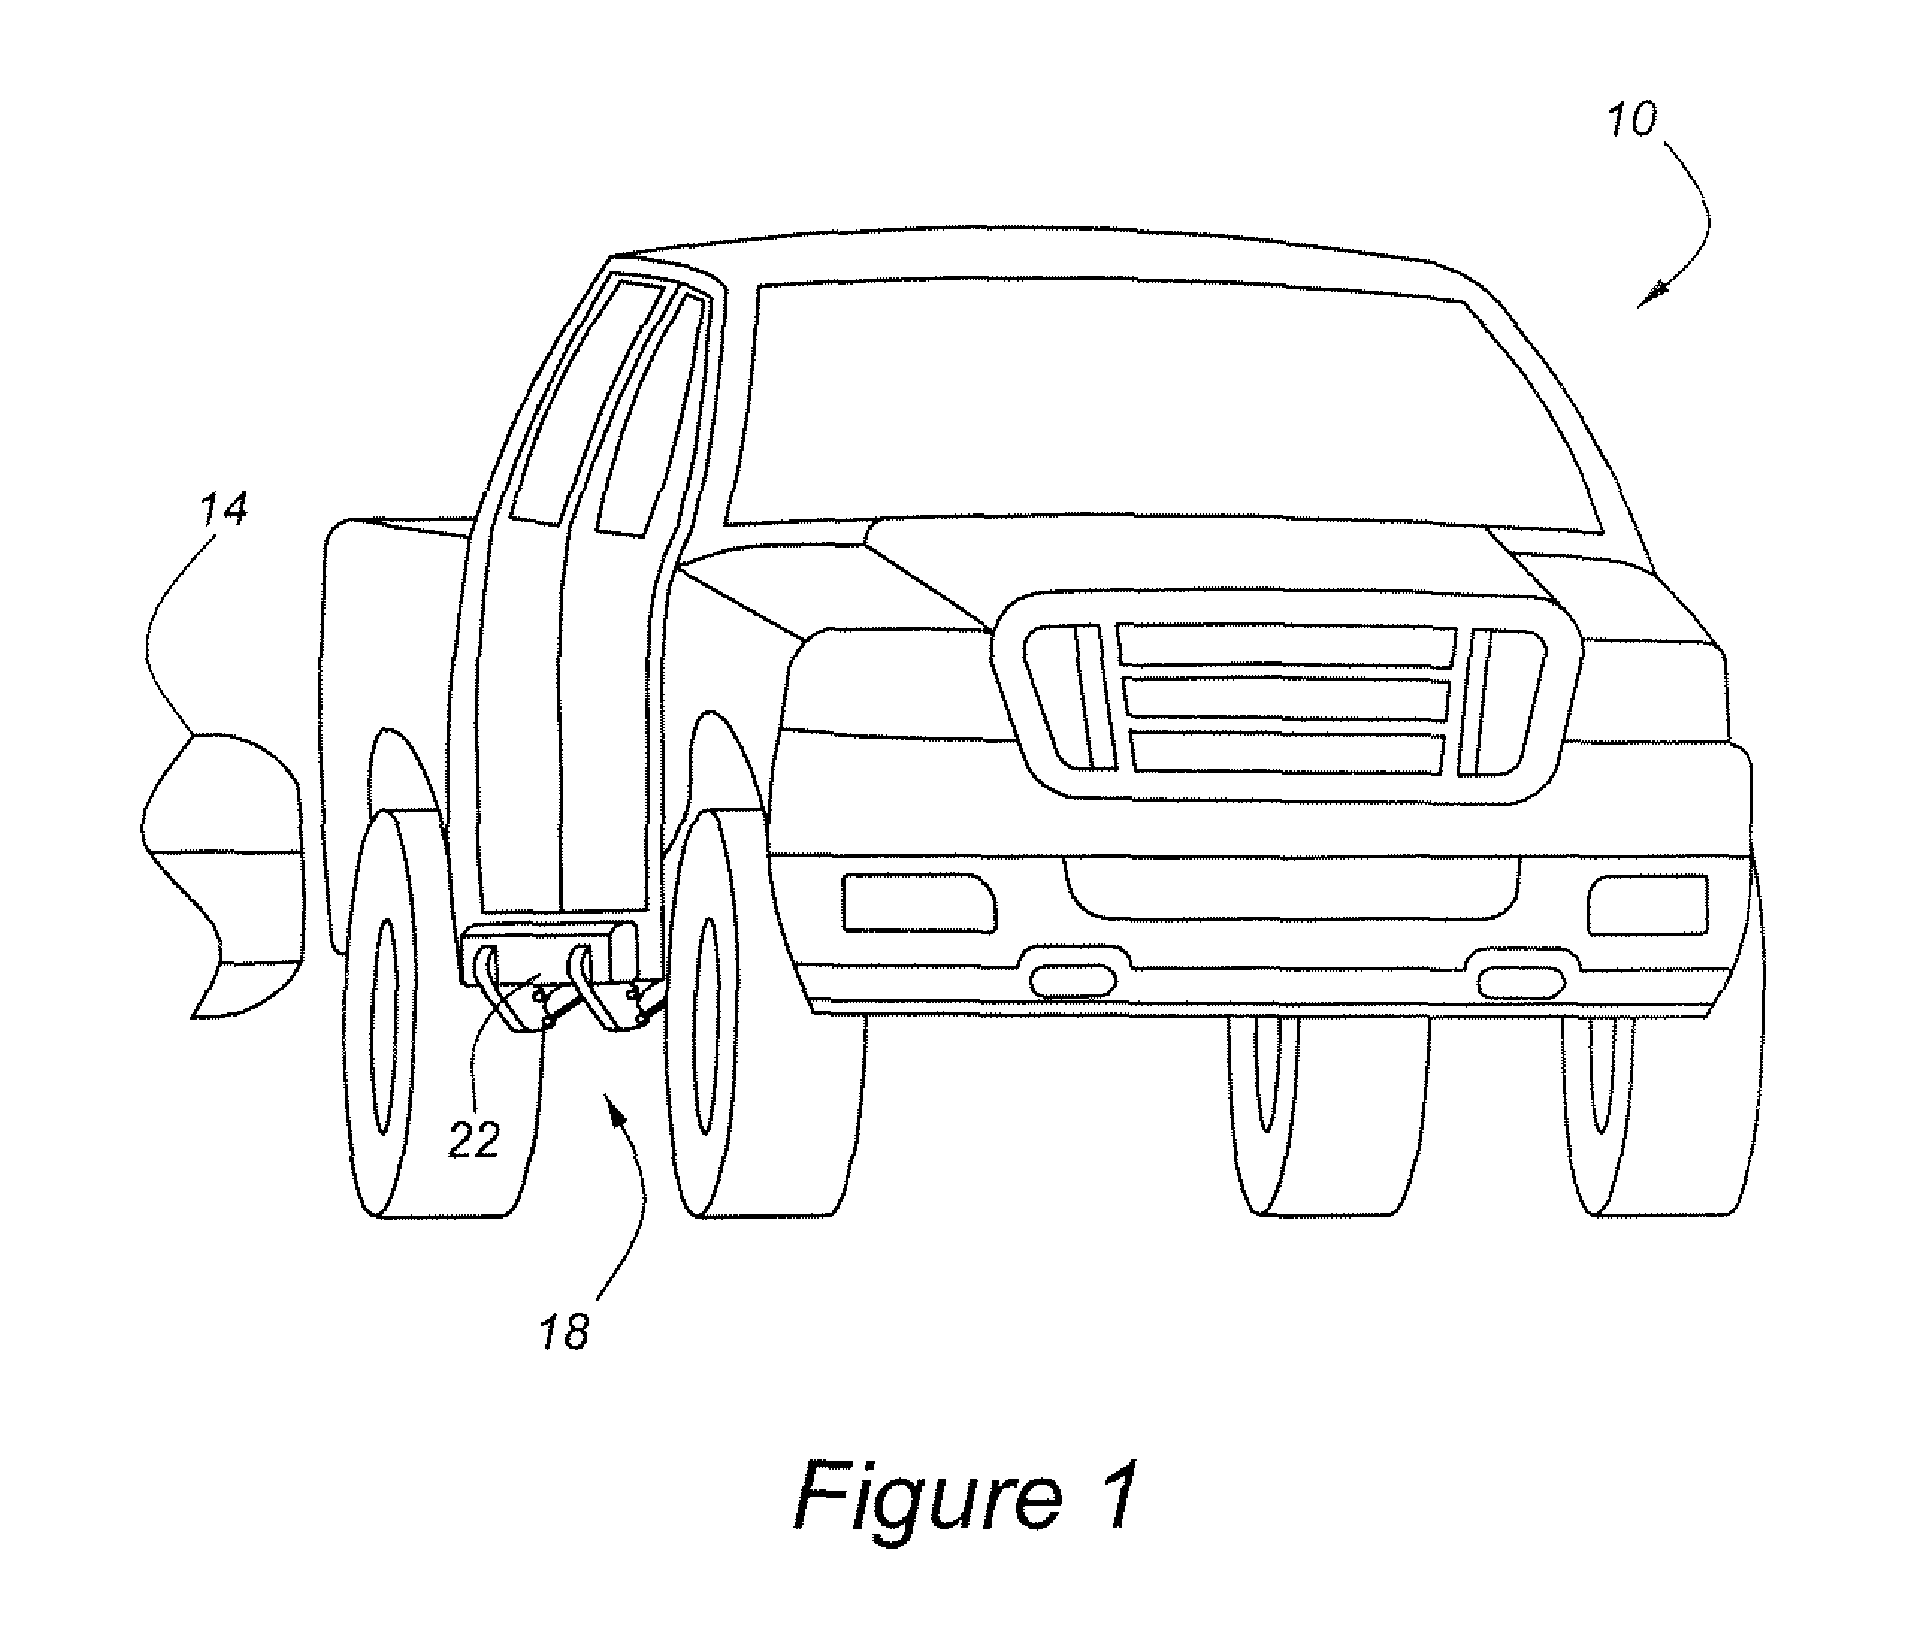 Supplemental side impact protection system for automotive vehicle